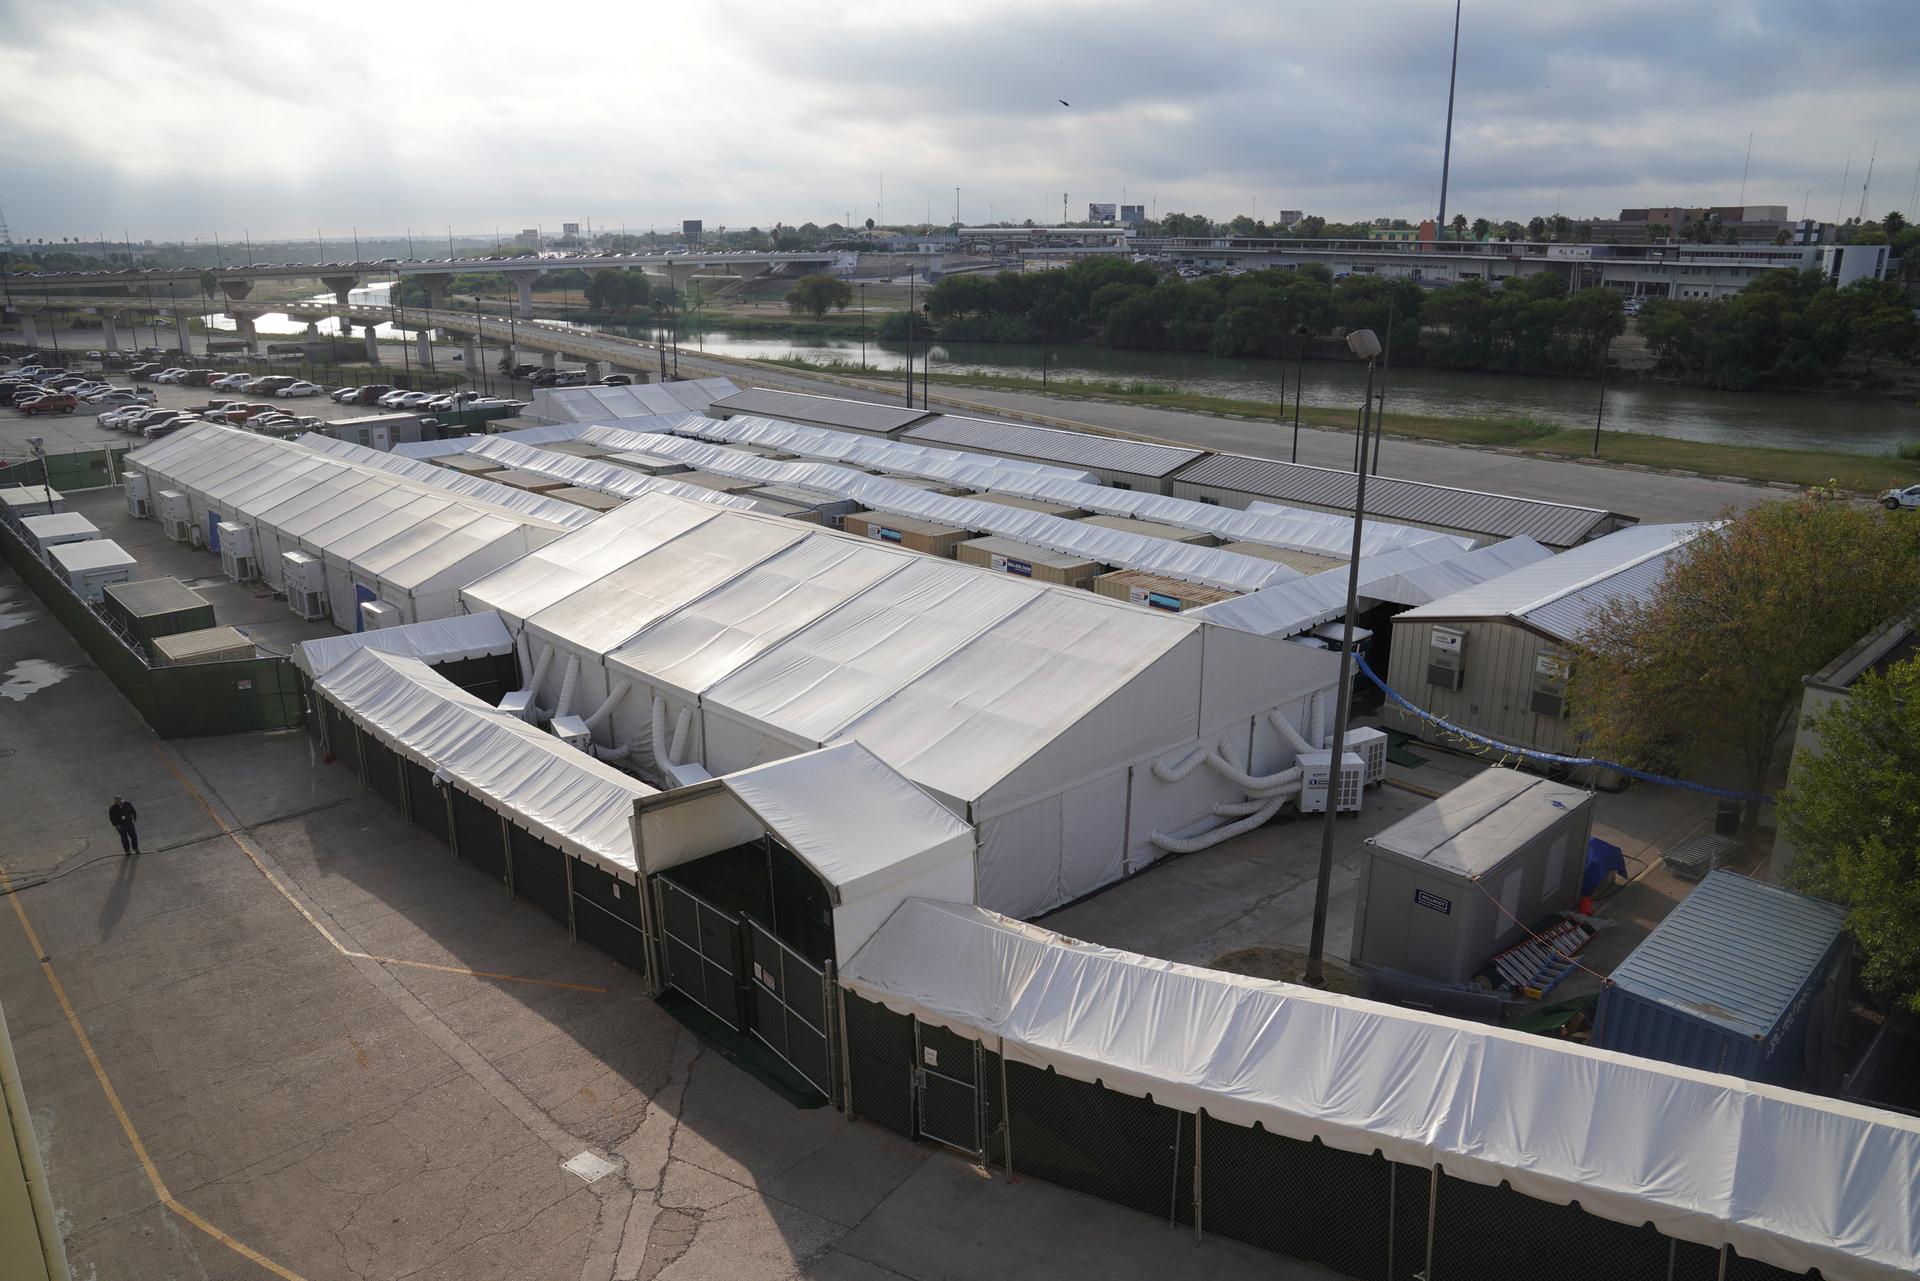 Soft-sided immigration court tents as seen in Laredo, Texas, October 9, 2019.